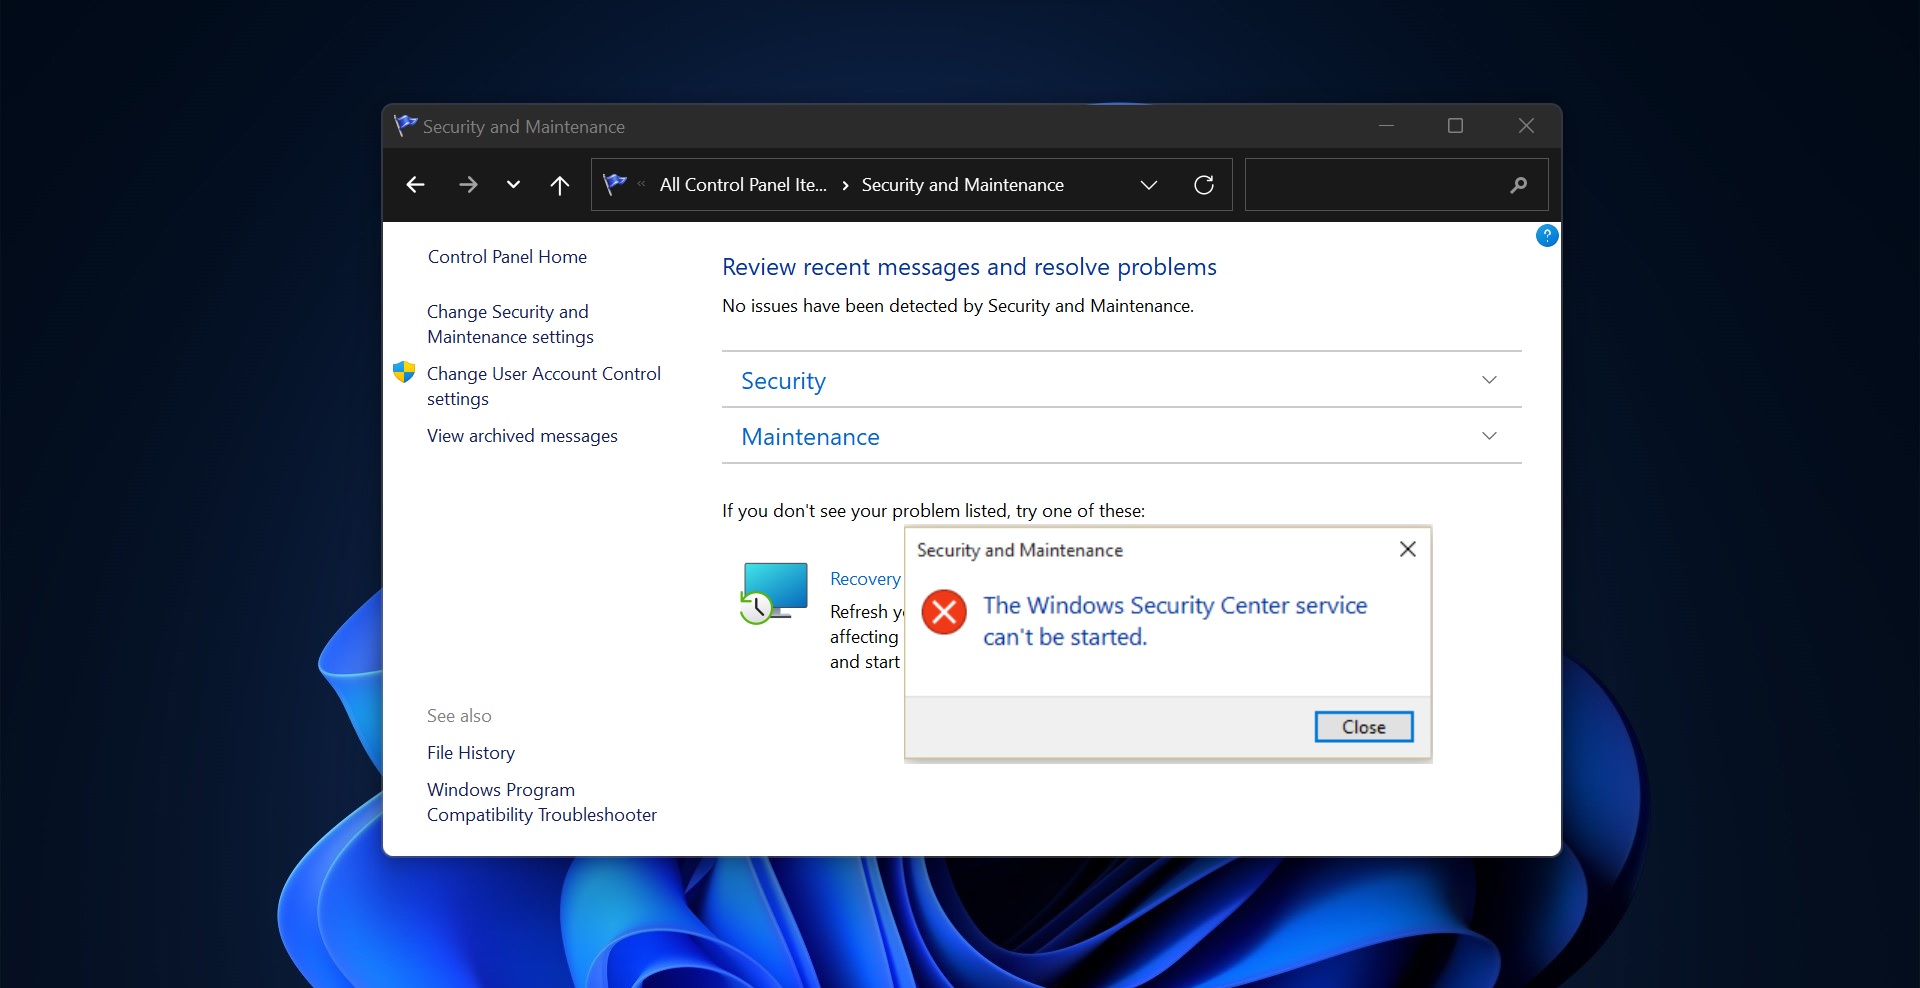 Windows Security Center Service can’t be started